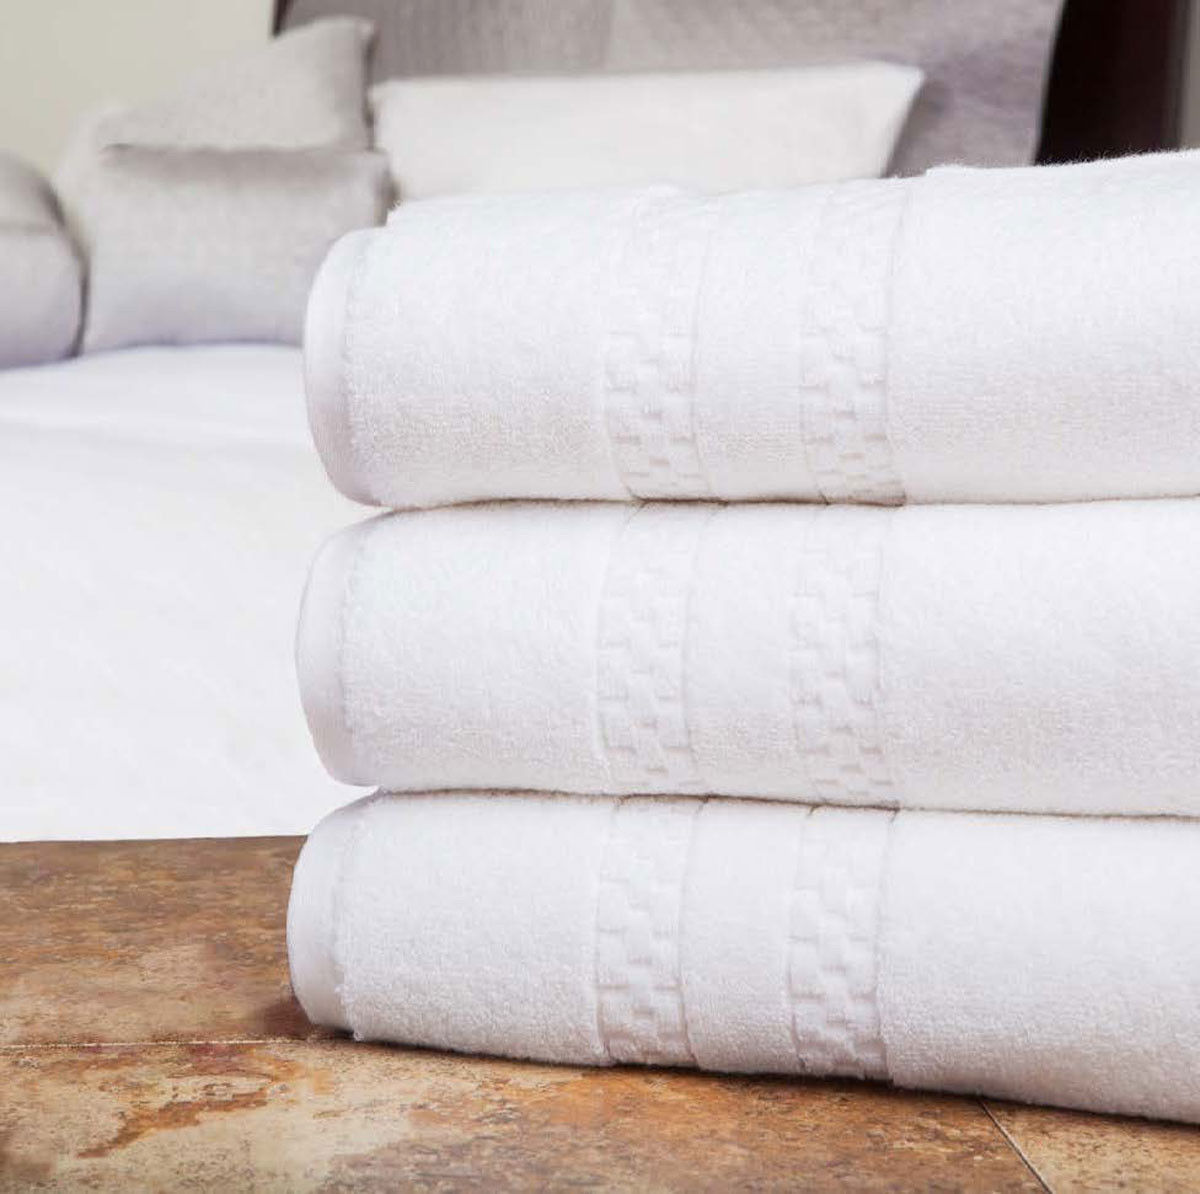 Will the villa di lusso towels offer a luxurious experience?